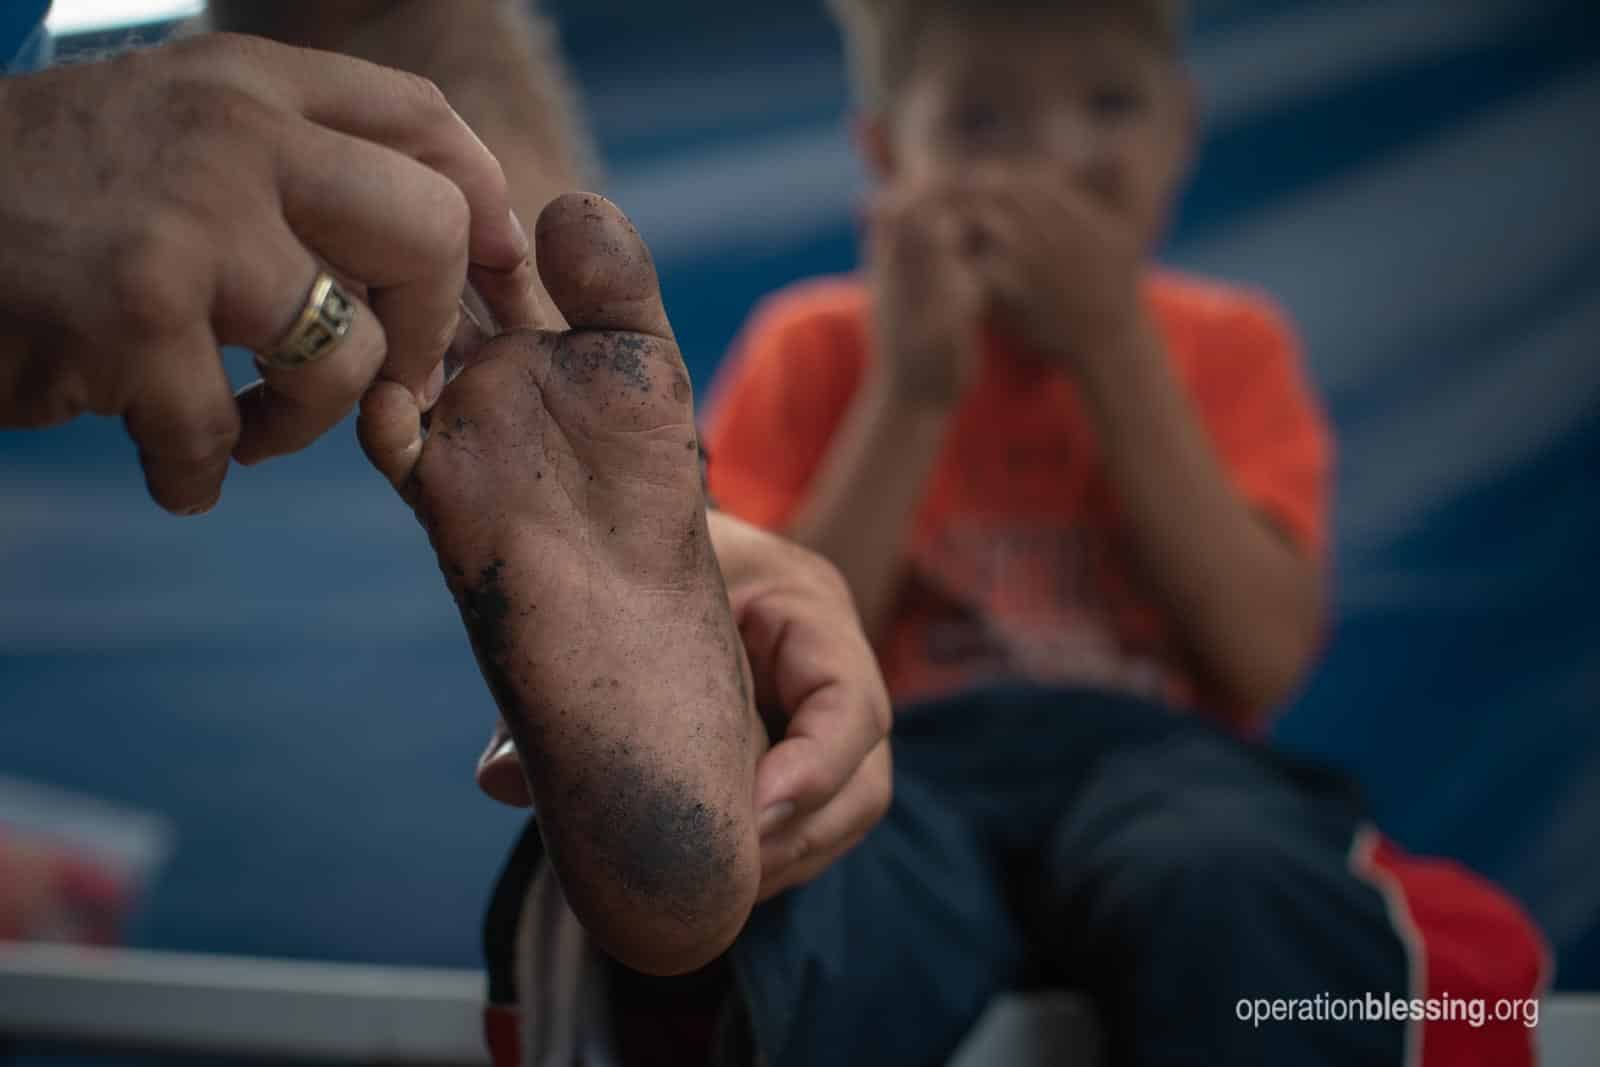 The dirty injured foot of a young Venezuelan refugee.